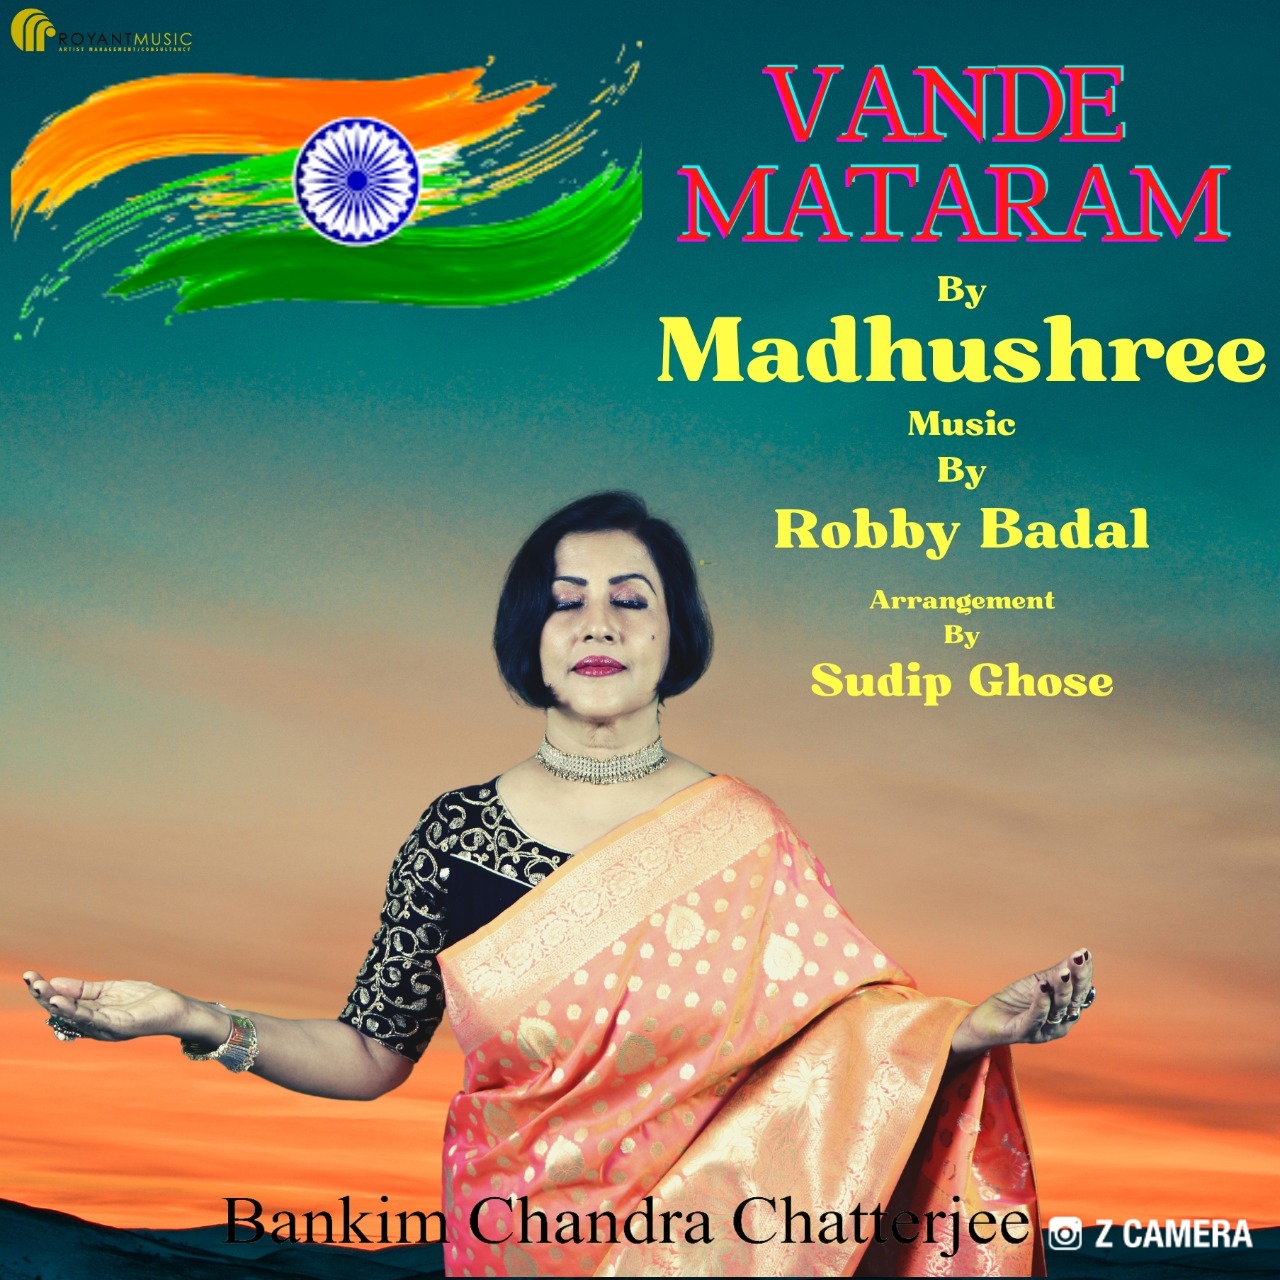 Playback singer Madhushree pays her tribute to Mother India with Vande Mataram rendition